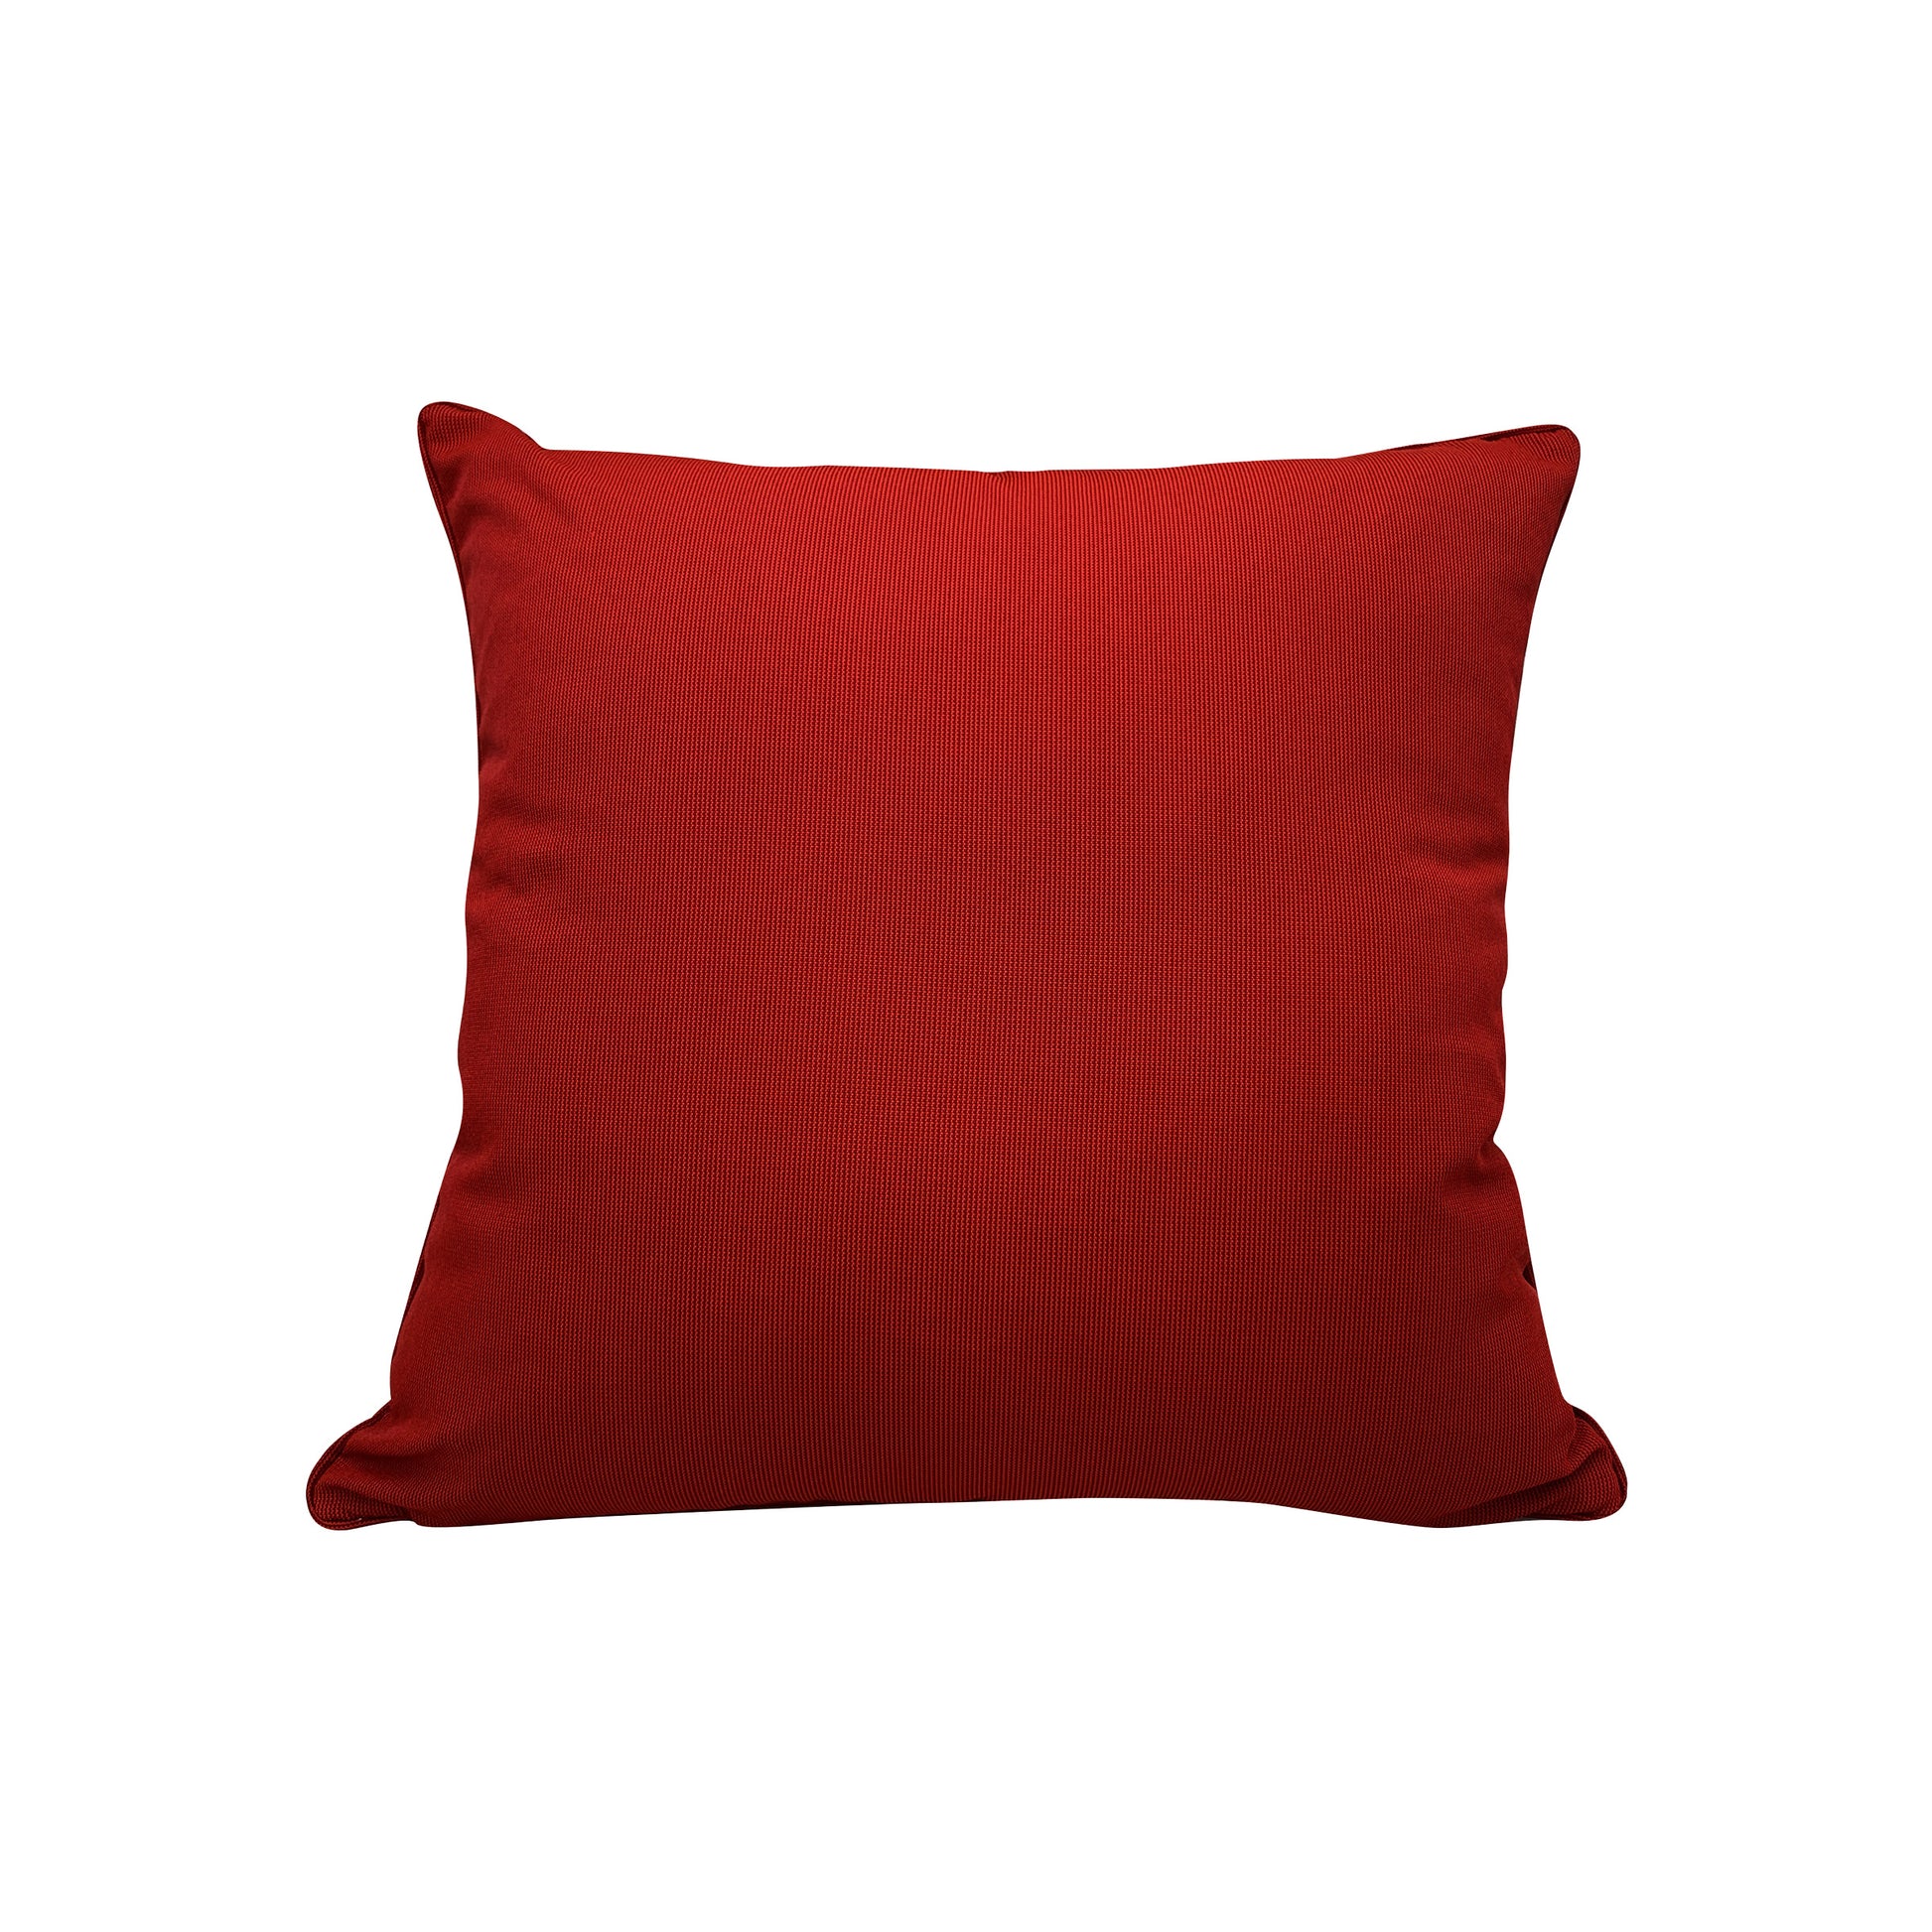 Solid red; back side of the Fan Coral Red and White pillow